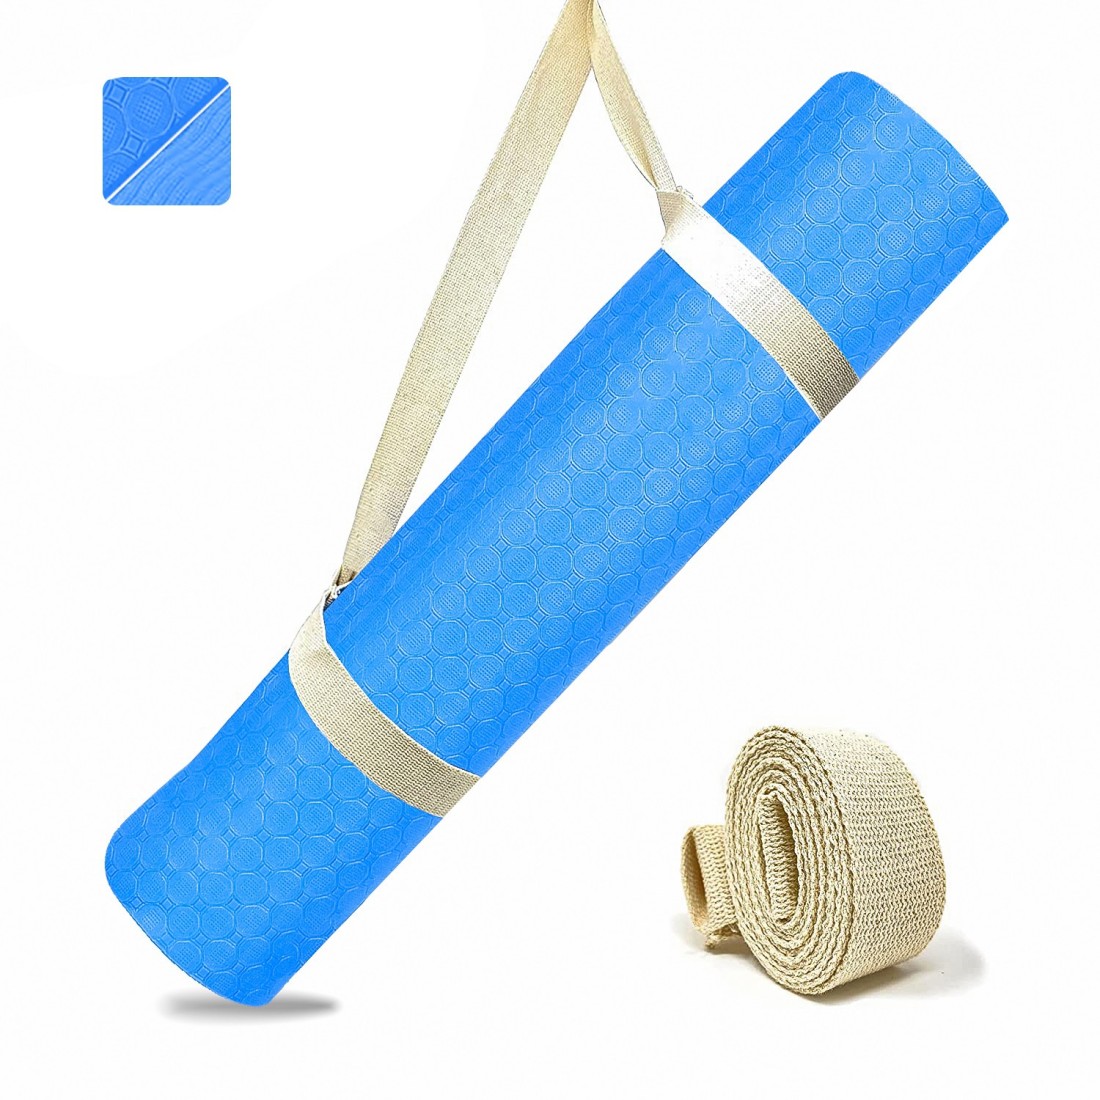 Strauss Anti Skid Eco-Friendly TPE Yoga Mat with Carry Strap, Sky Blue 4 mm  Yoga Mat - Buy Strauss Anti Skid Eco-Friendly TPE Yoga Mat with Carry Strap,  Sky Blue 4 mm